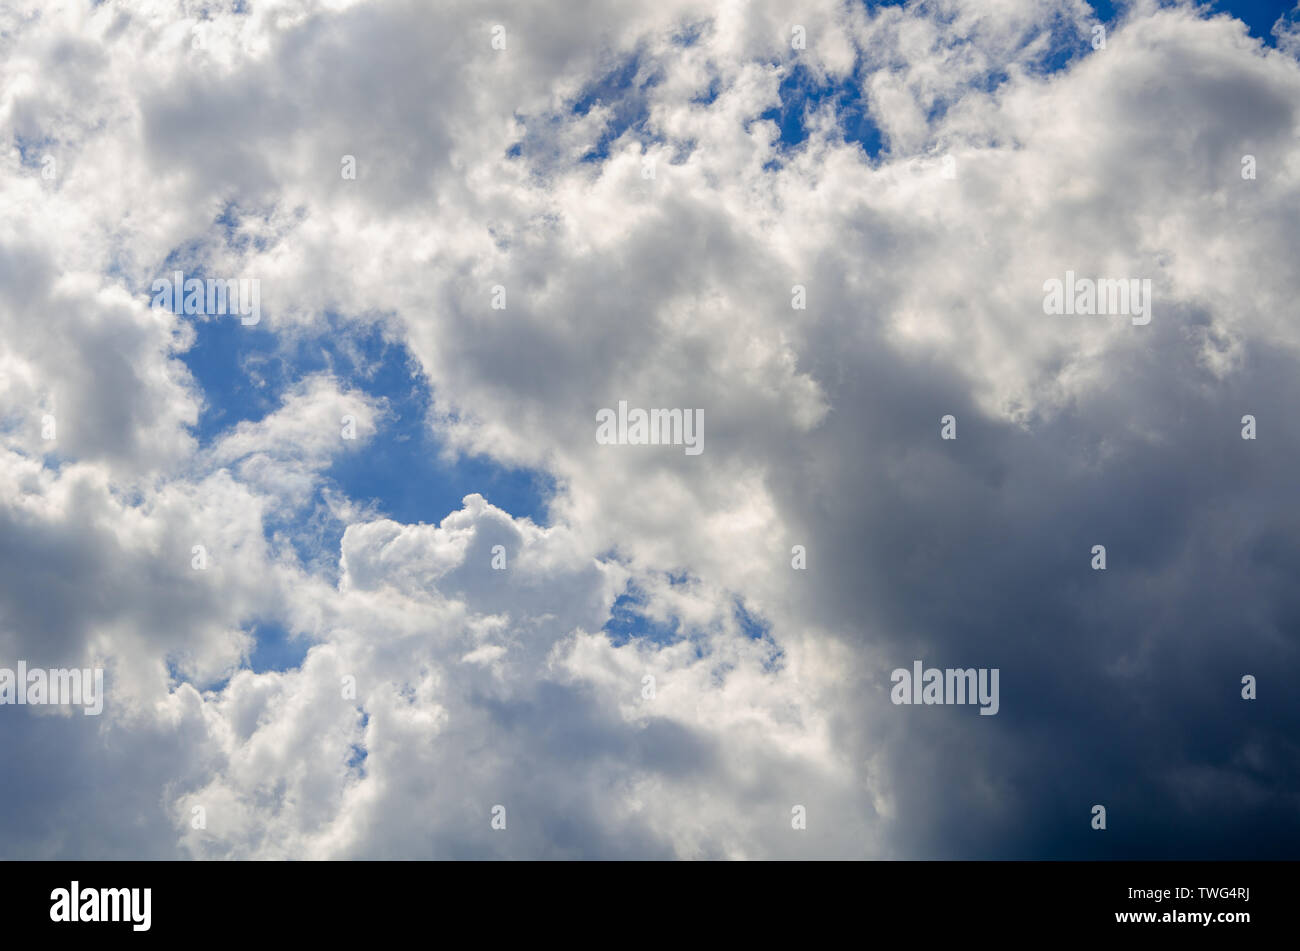 Blue sky background with gray clouds Stock Photo